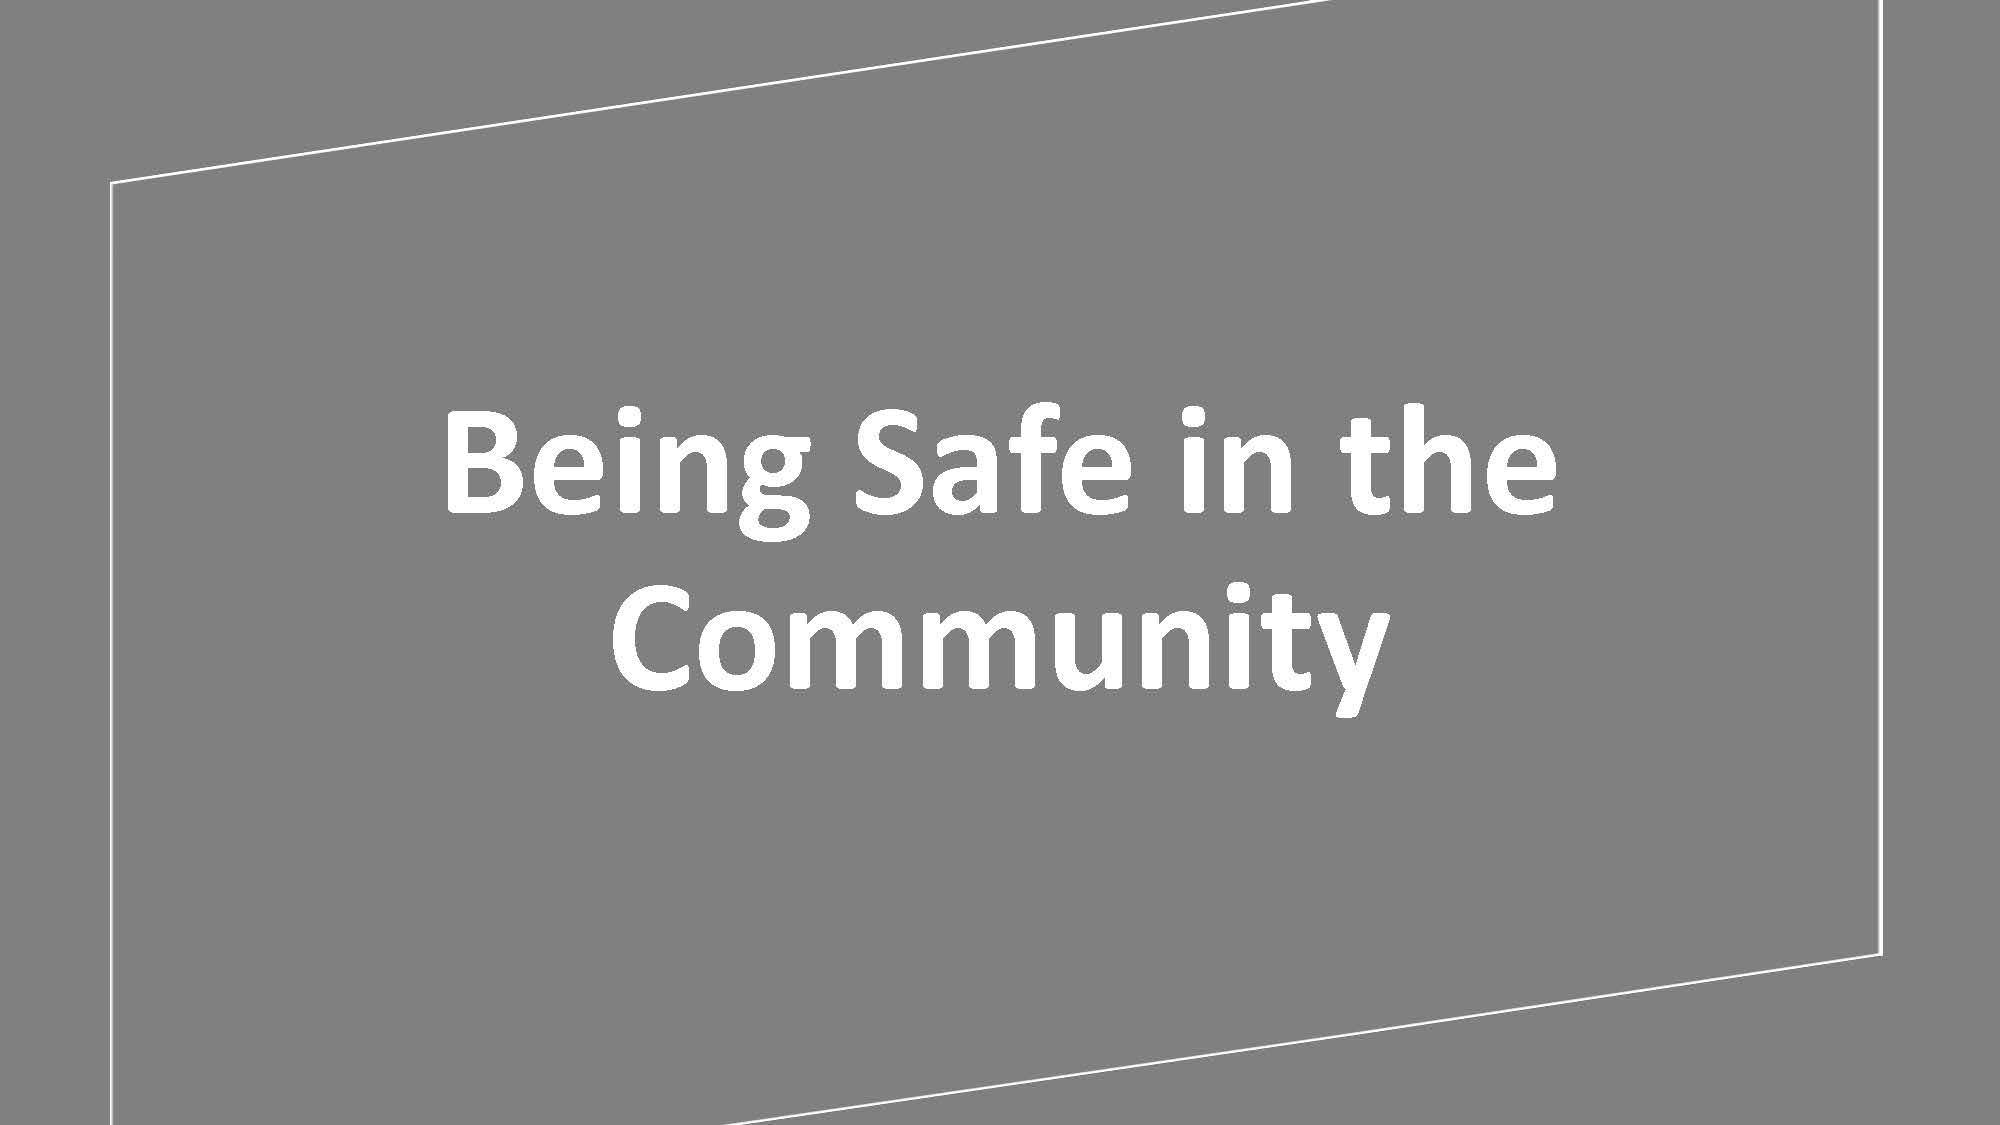 Being Safe in the Community